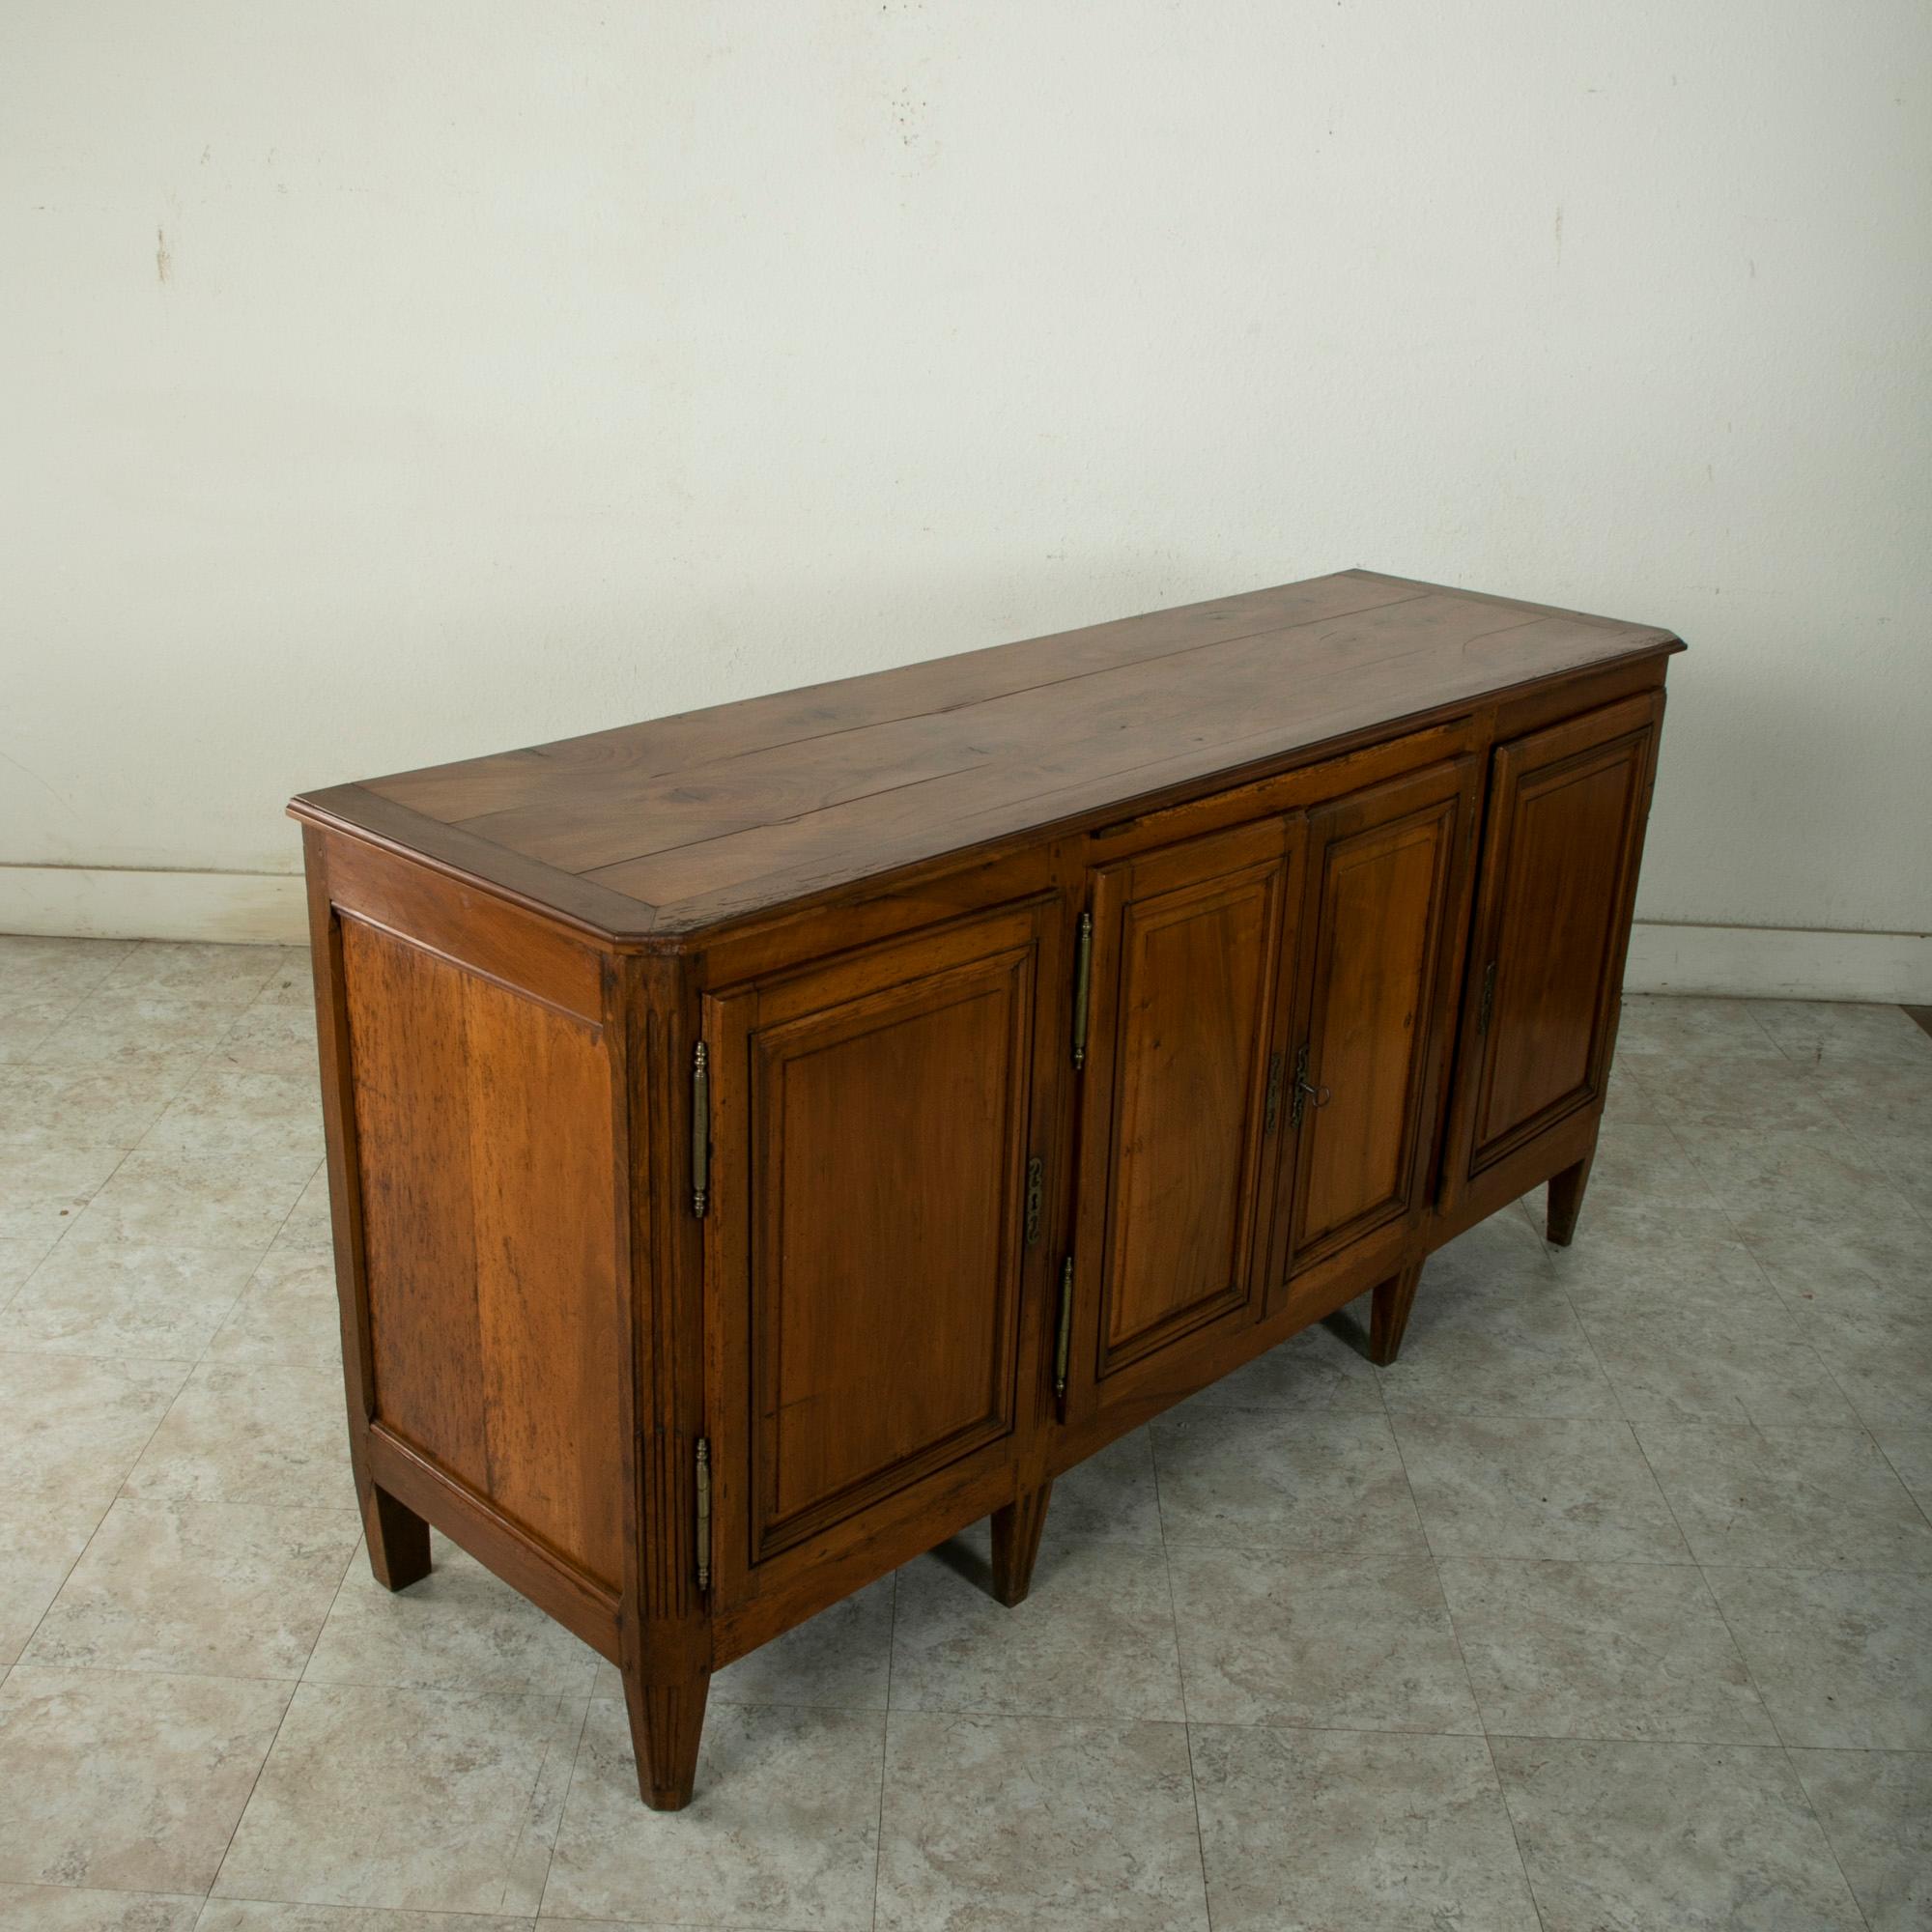 This late nineteenth century Louis XVI style enfilade, sideboard, or buffet is constructed of solid walnut and features a beveled top and central pull out tray. Of hand pegged construction, this piece has classic Louis XVI fluted corners and rests